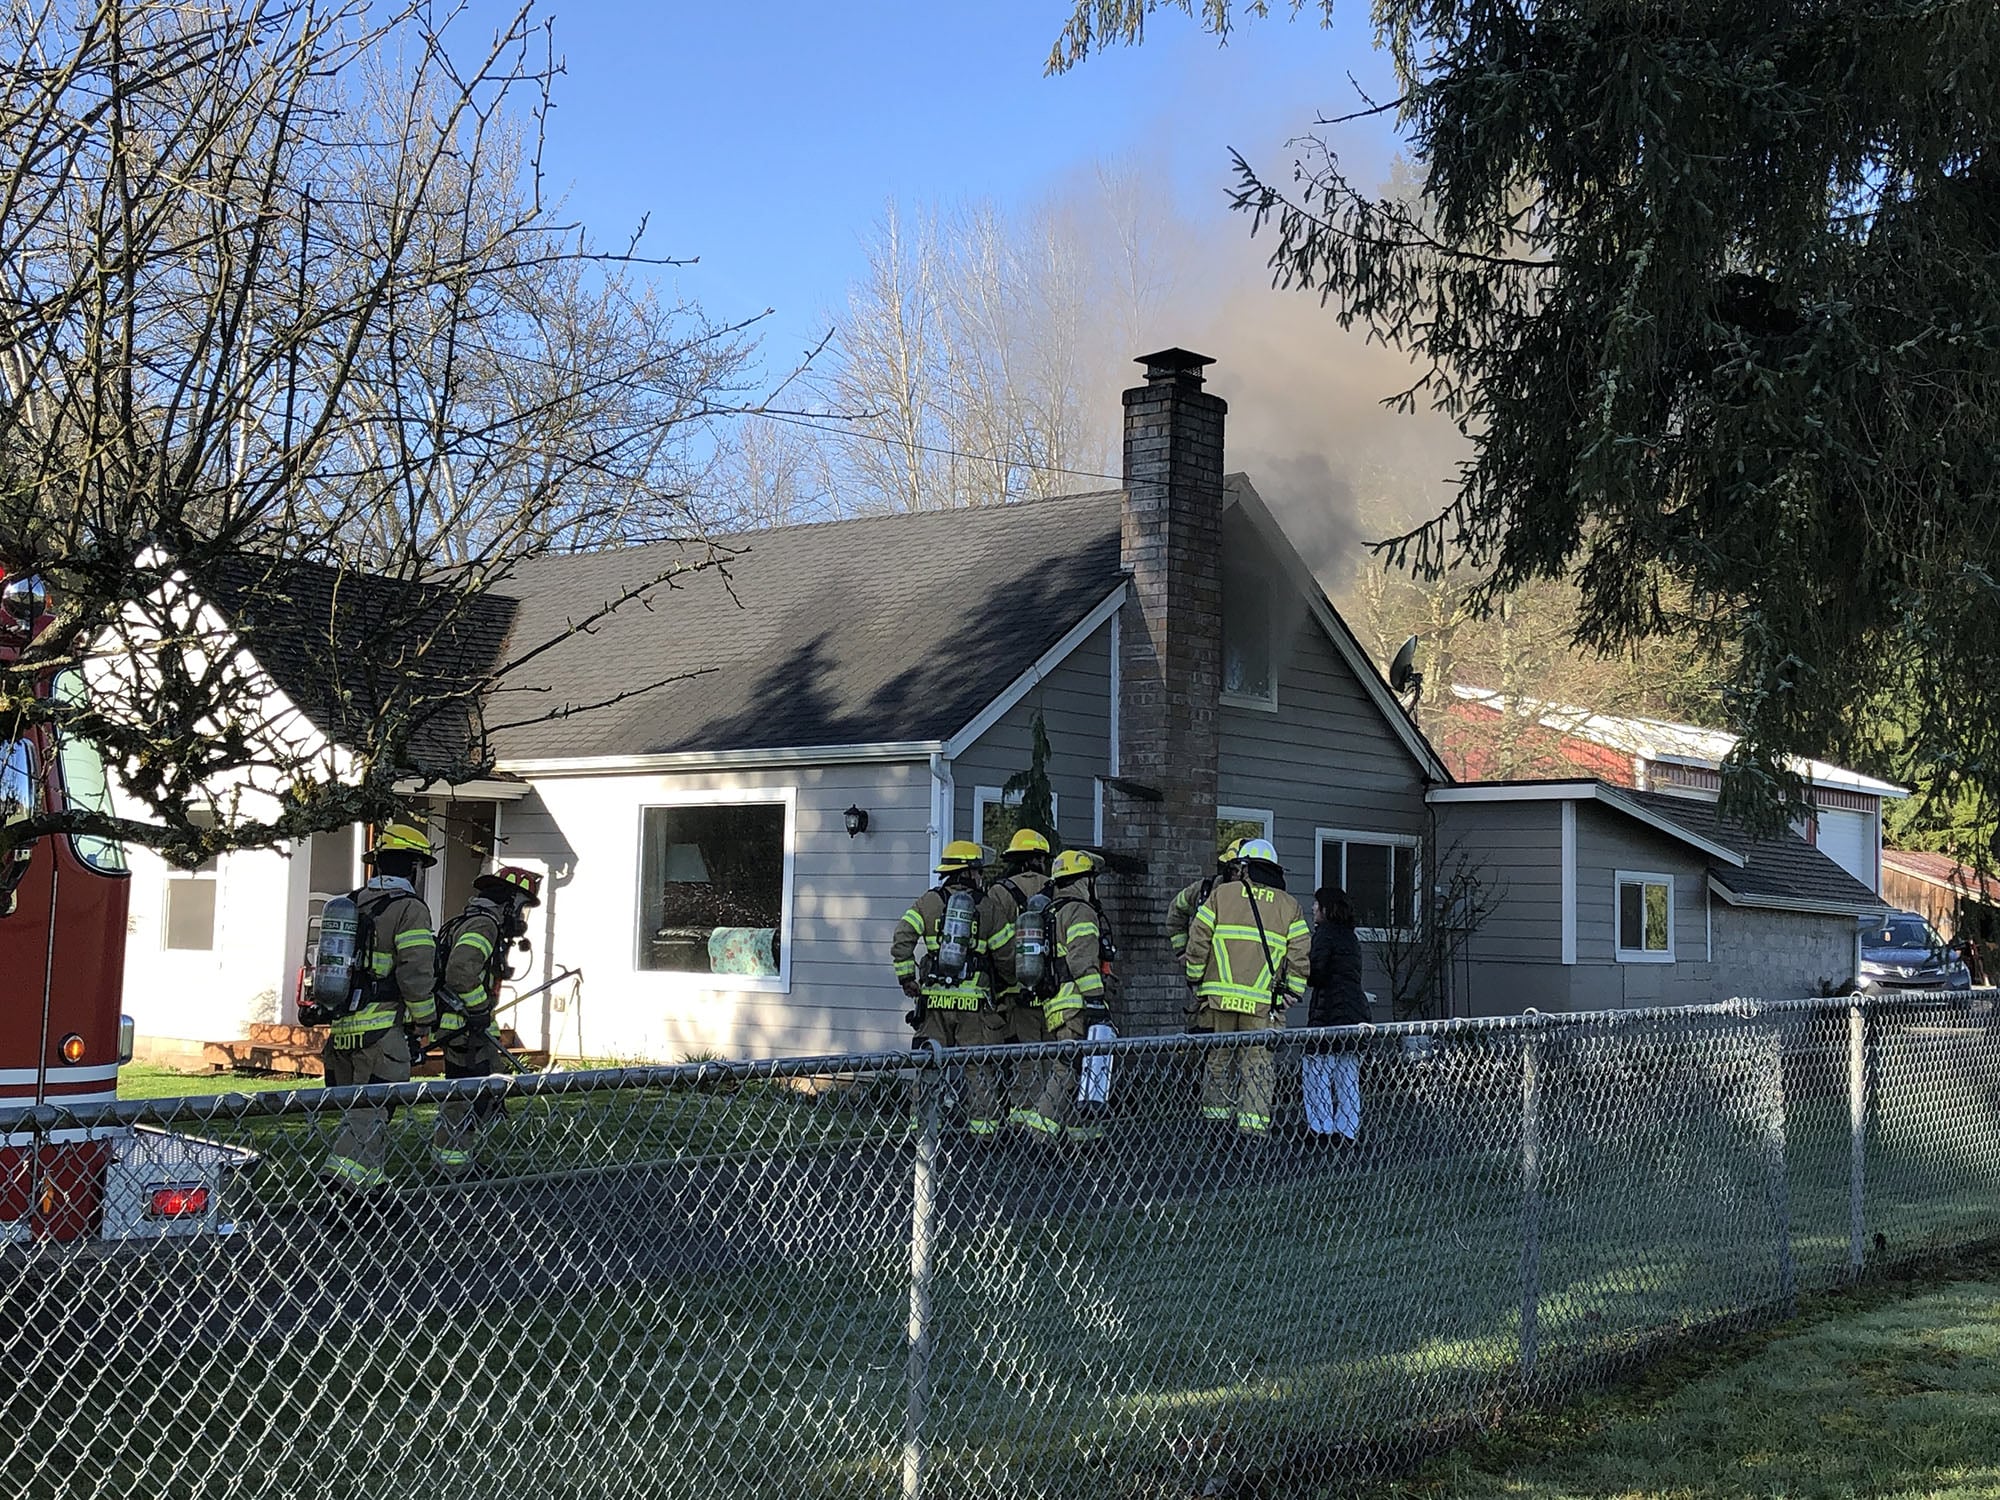 Three dogs survived a fire Tuesday morning at a home near Dollars Corner, including two by rescue.